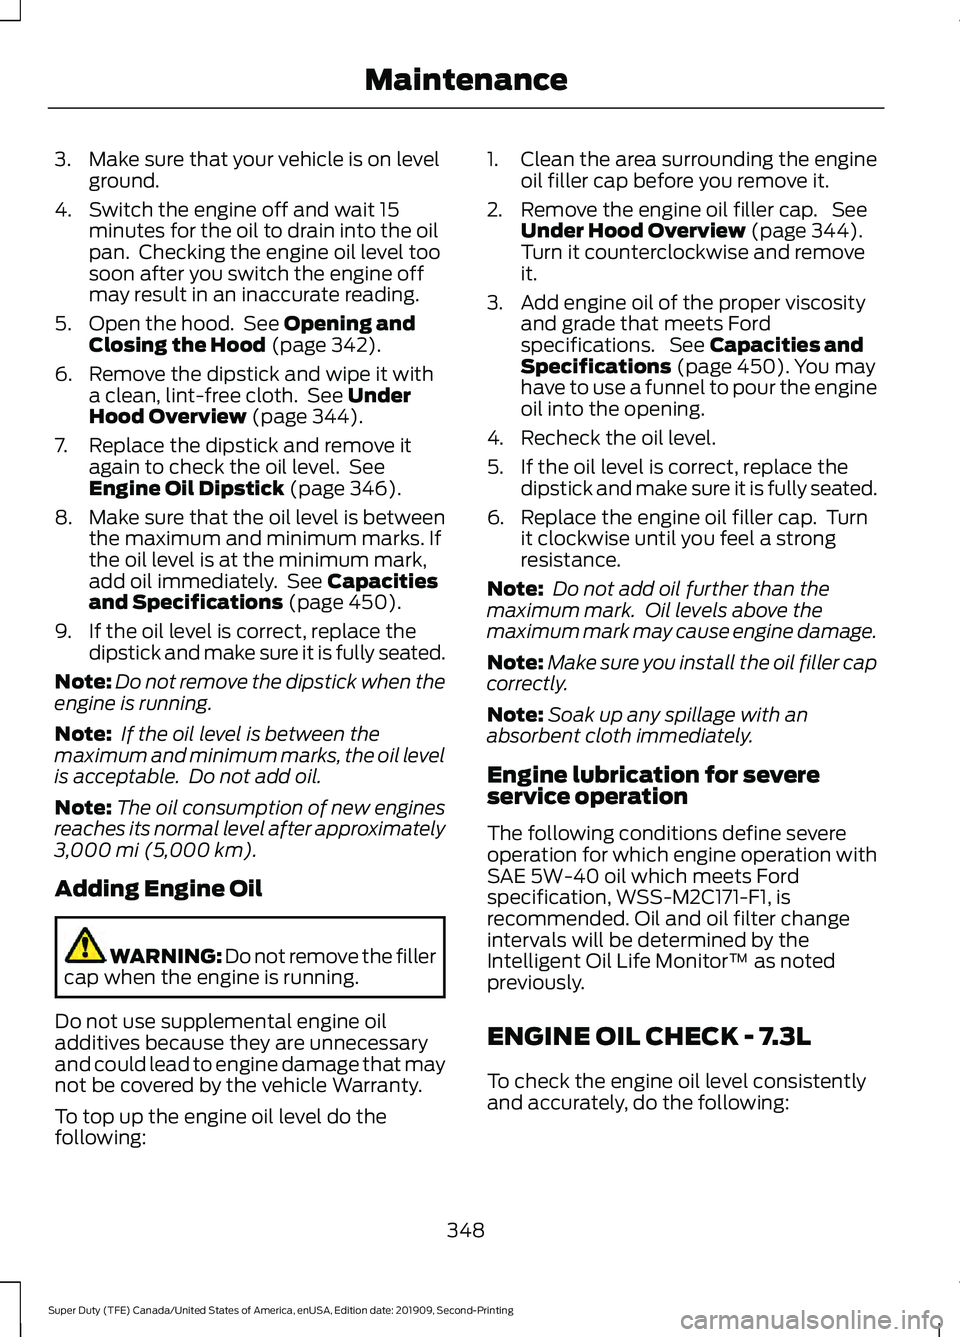 FORD F250 SUPER DUTY 2020  Owners Manual 3. Make sure that your vehicle is on level
ground.
4. Switch the engine off and wait 15 minutes for the oil to drain into the oil
pan.  Checking the engine oil level too
soon after you switch the engi